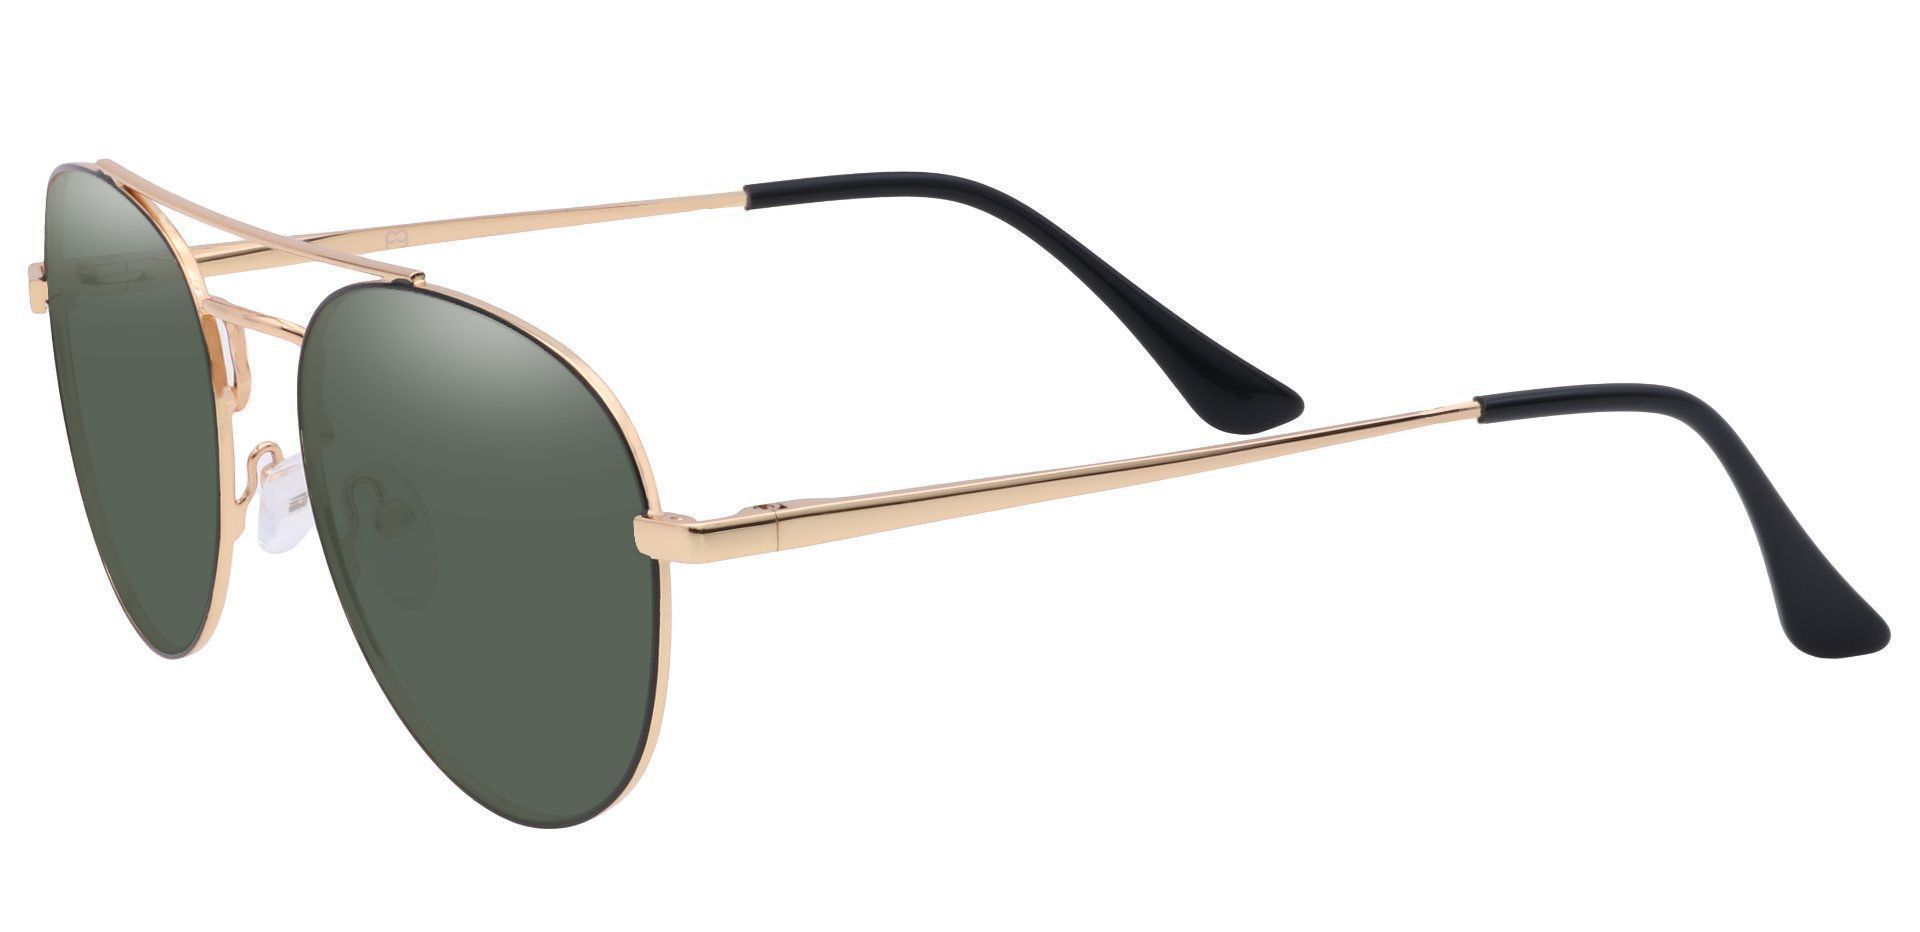 Trapp Aviator Lined Bifocal Sunglasses - Gold Frame With Green Lenses